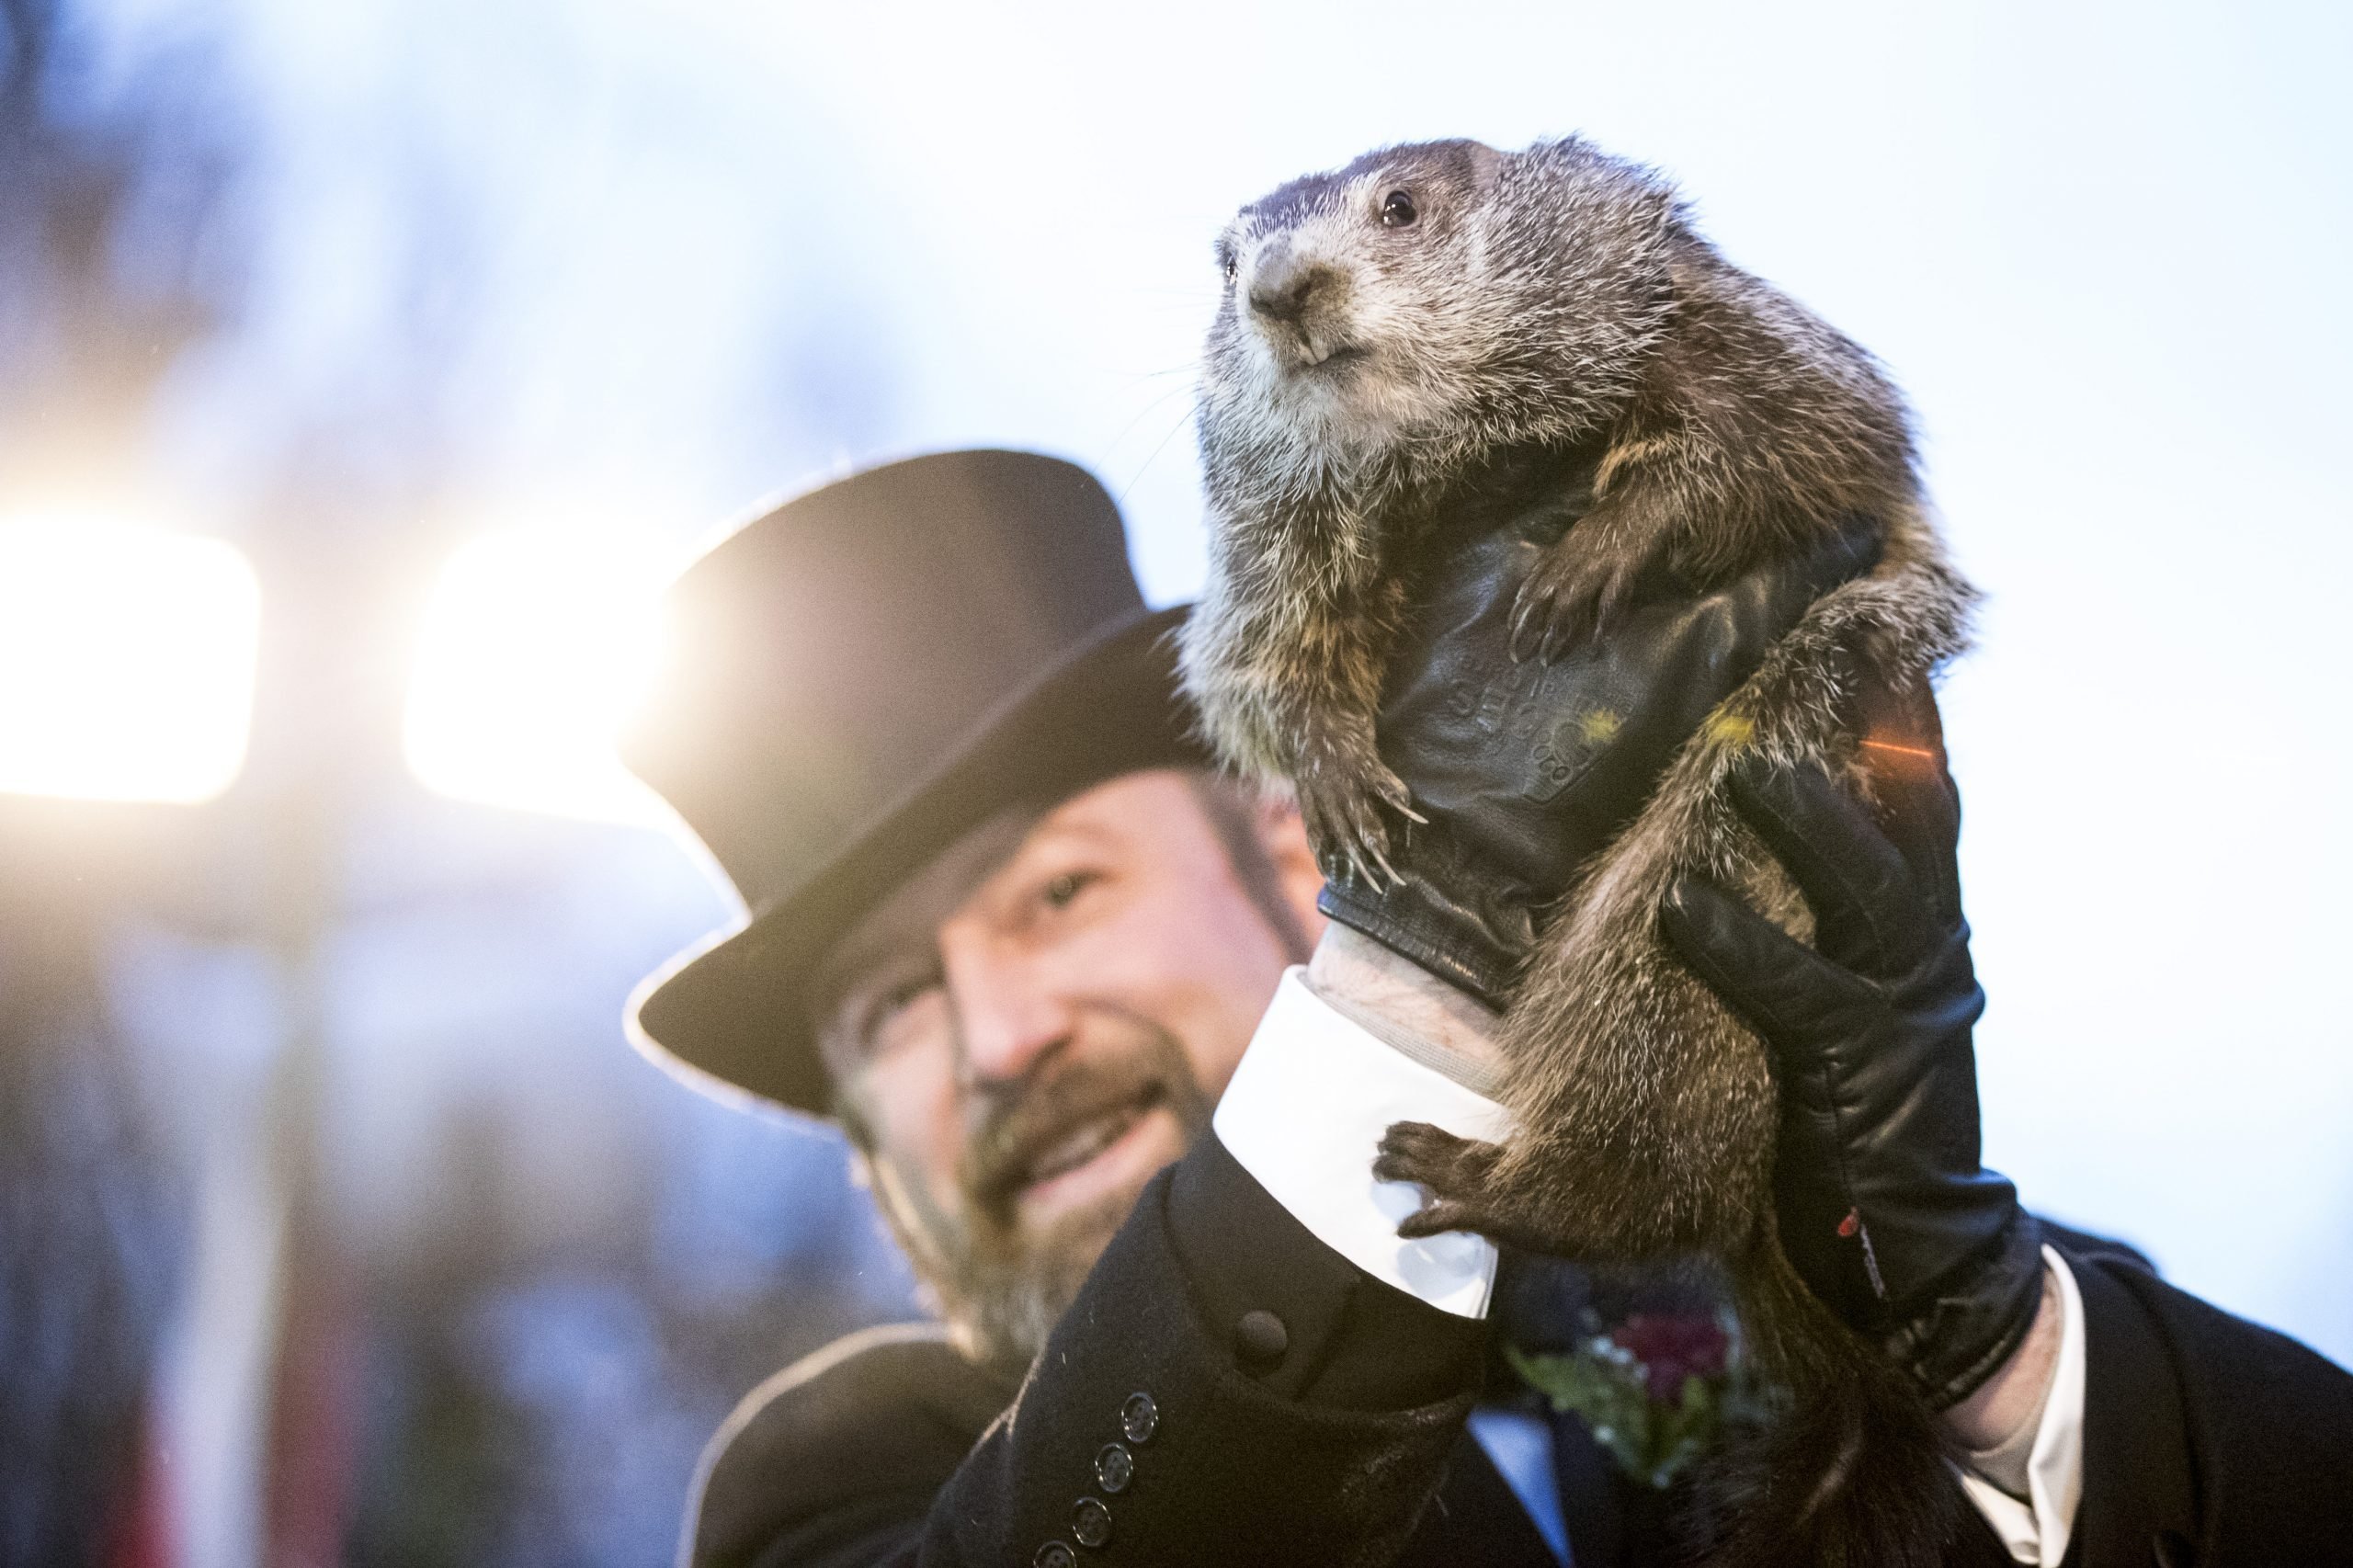 Groundhog Day History How Groundhog Day Came to Be Trusted Since 1922